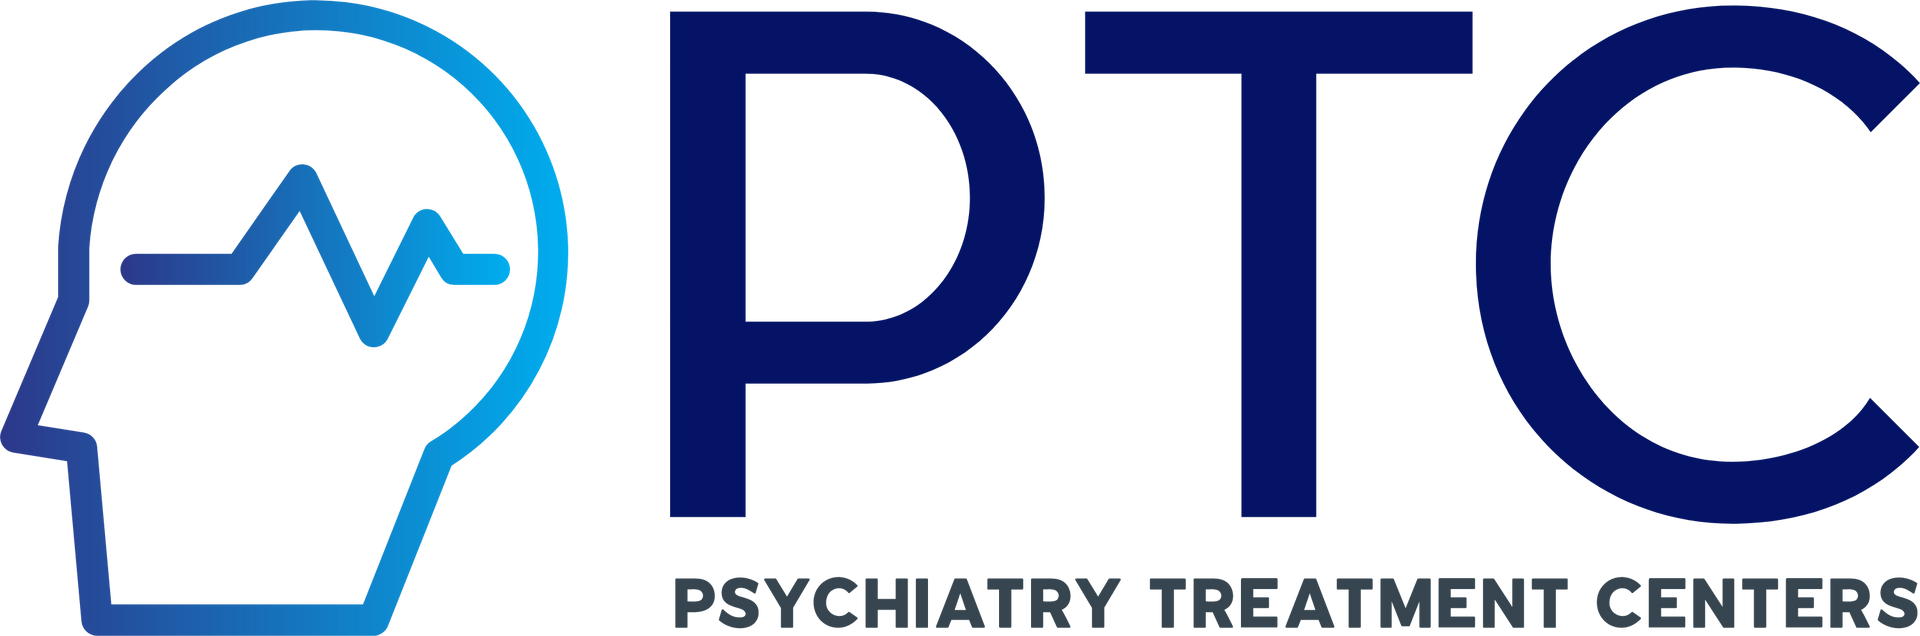 Psychiatry Treatment Centers logo mental health clinic with tms therapy logo